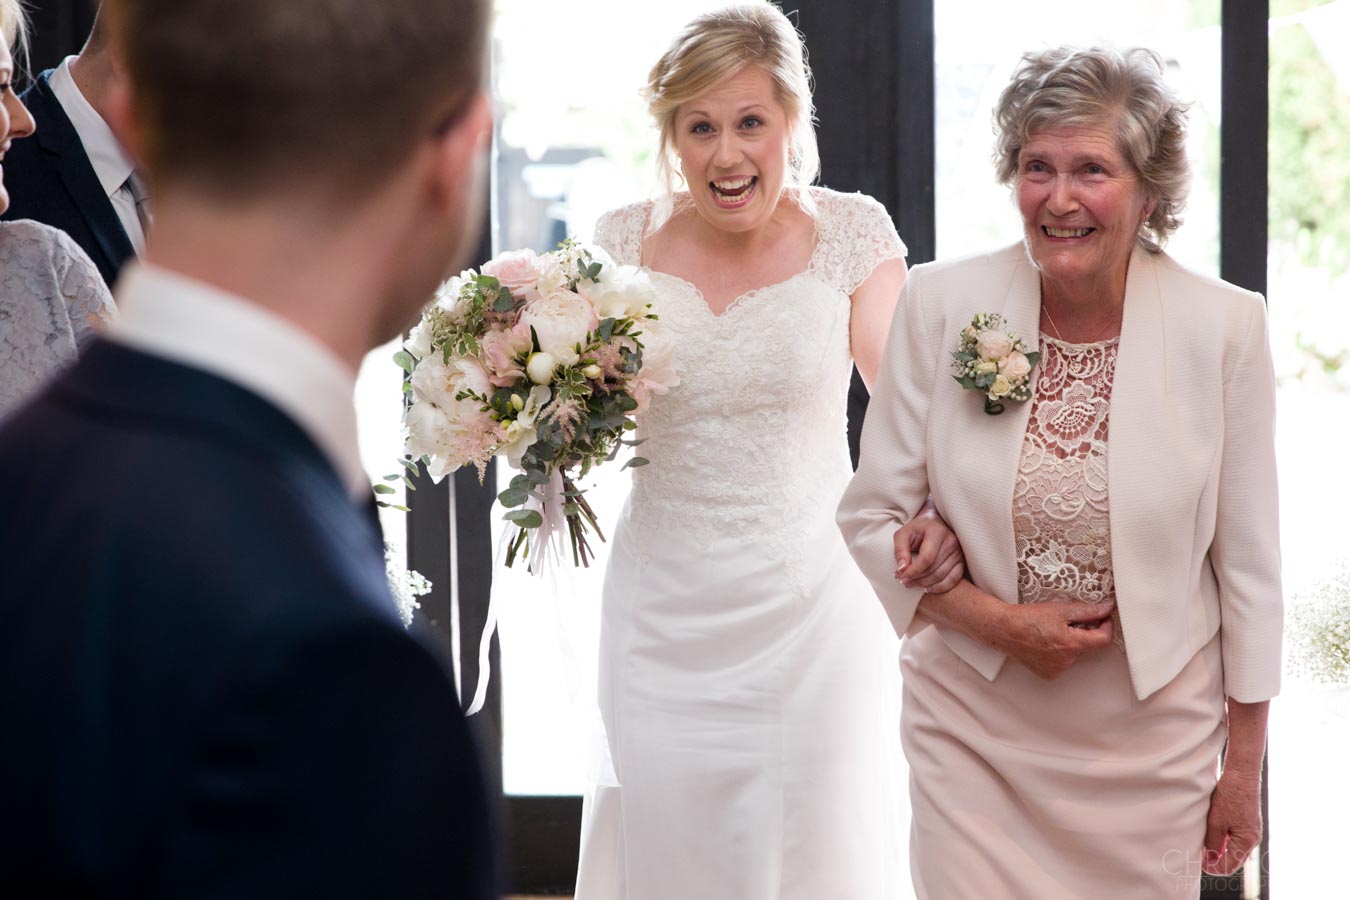 Grandmother Walking the Bride down The Aisle